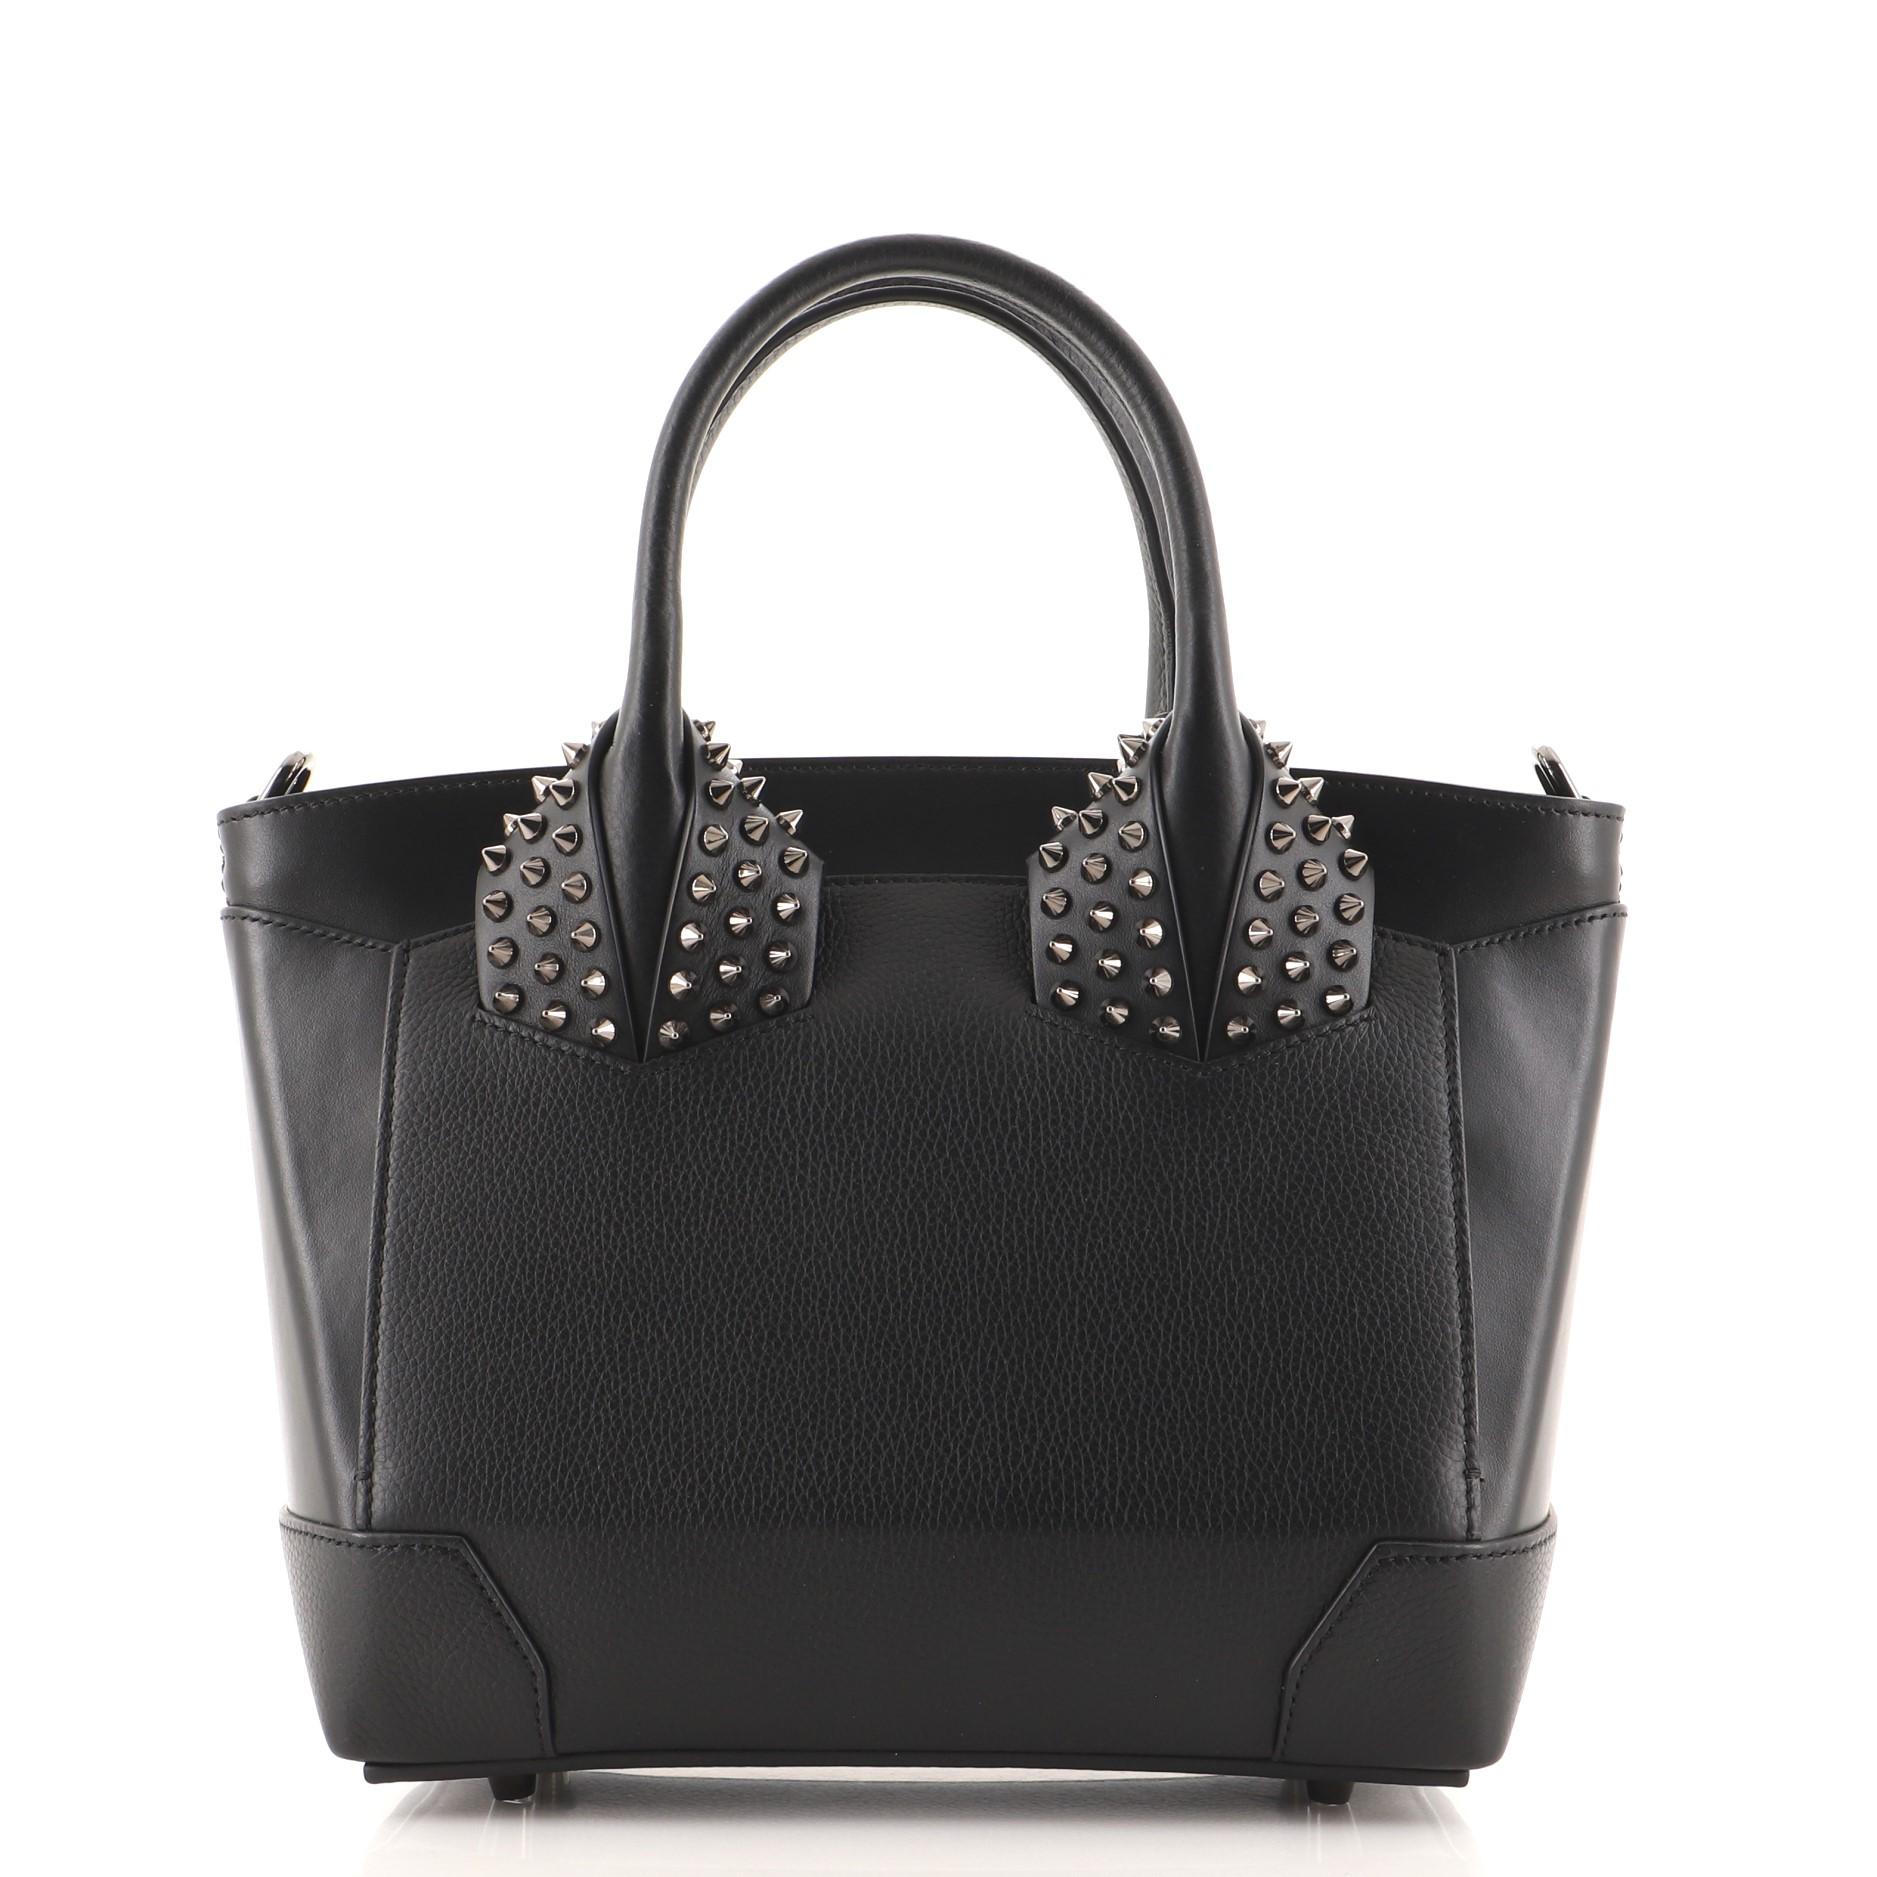 Black Christian Louboutin Eloise Satchel Spiked Leather Small